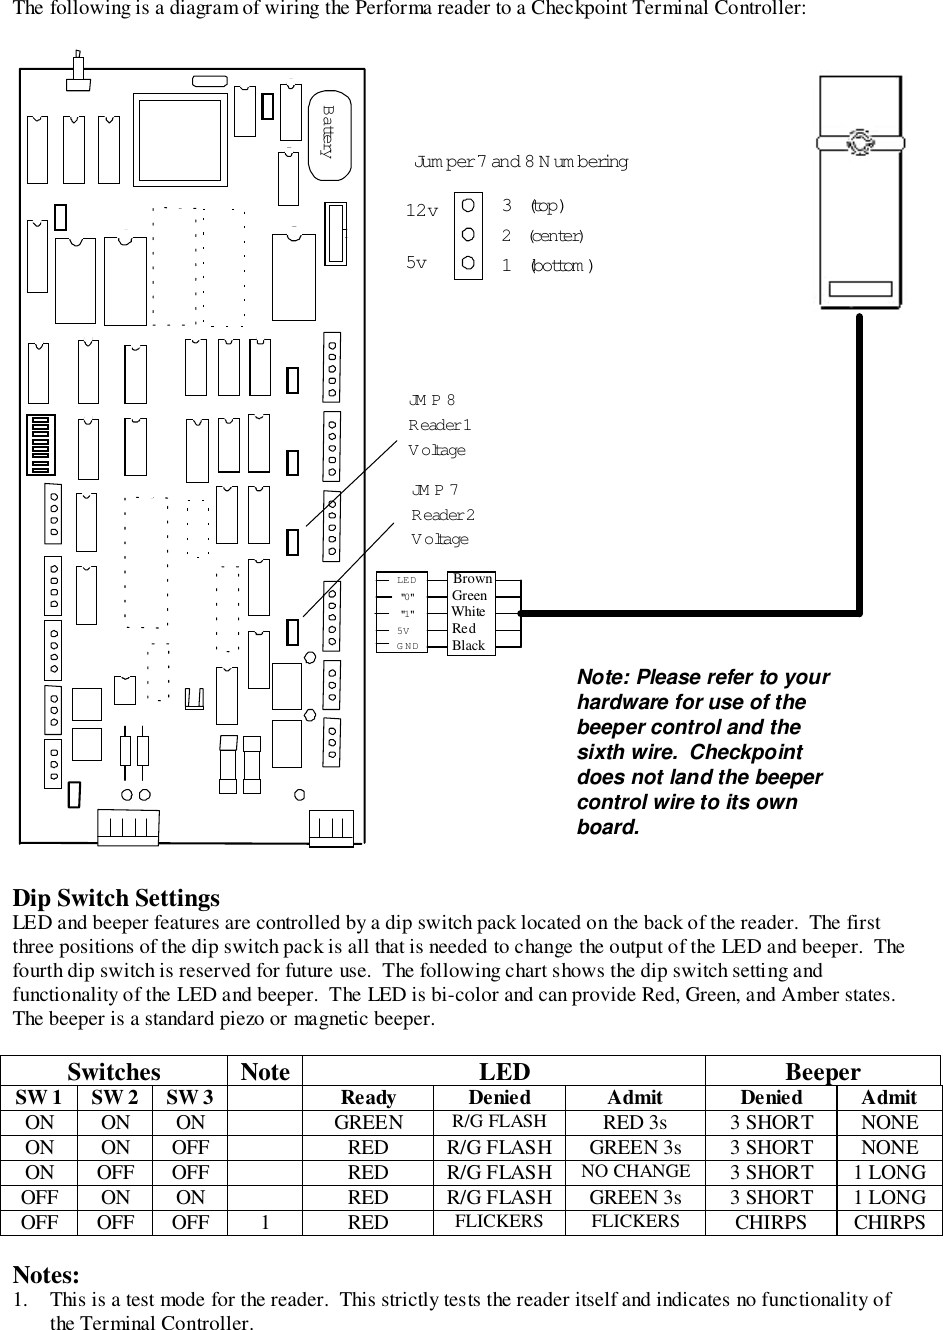 The following is a diagram of wiring the Performa reader to a Checkpoint Terminal Controller:Dip Switch SettingsLED and beeper features are controlled by a dip switch pack located on the back of the reader.  The firstthree positions of the dip switch pack is all that is needed to change the output of the LED and beeper.  Thefourth dip switch is reserved for future use.  The following chart shows the dip switch setting andfunctionality of the LED and beeper.  The LED is bi-color and can provide Red, Green, and Amber states.The beeper is a standard piezo or magnetic beeper.Switches Note LED BeeperSW 1 SW 2 SW 3 Ready Denied Admit Denied AdmitON ON ON GREEN R/G FLASH RED 3s 3 SHORT NONEON ON OFF RED R/G FLASH GREEN 3s 3 SHORT NONEON OFF OFF RED R/G FLASH NO CHANGE 3 SHORT 1 LONGOFF ON ON RED R/G FLASH GREEN 3s 3 SHORT 1 LONGOFF OFF OFF 1 RED FLICKERS FLICKERS CHIRPS CHIRPSNotes:1. This is a test mode for the reader.  This strictly tests the reader itself and indicates no functionality ofthe Terminal Controller.Note: Please refer to yourhardware for use of thebeeper control and thesixth wire.  Checkpointdoes not land the beepercontrol wire to its ownboard.JM P 8R eader 1VoltageJM P 7R eader 2VoltageJu m p er 7 and 8 Numbering3   (top)2   (center)1   (bottom )BatteryLED&quot;0&quot;&quot;1&quot;5VGND12v5vBrownWhiteRedBlackGreen